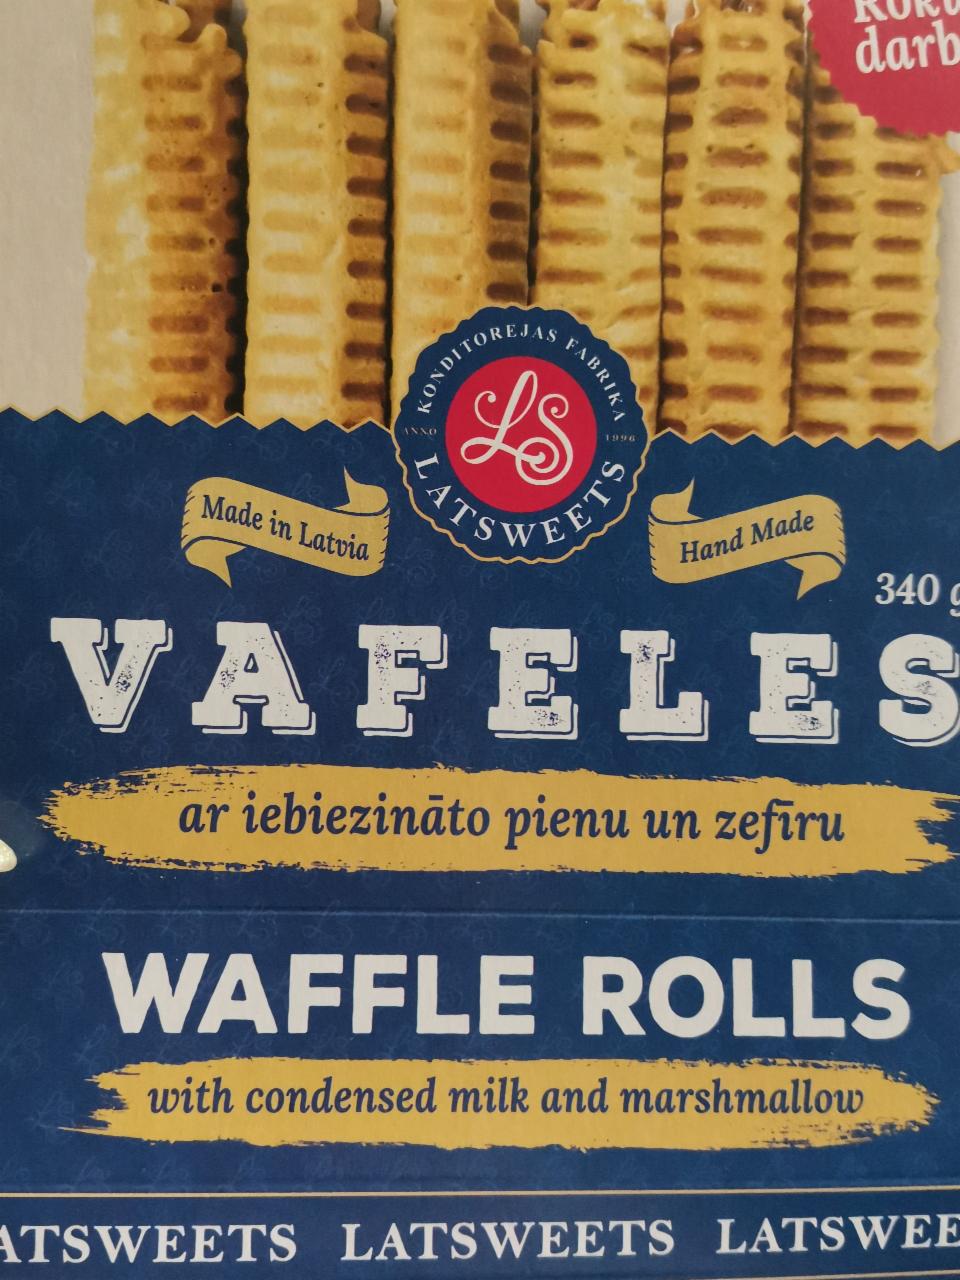 Fotografie - Waffle Rolls with condensed milk and marshmallow Latsweet